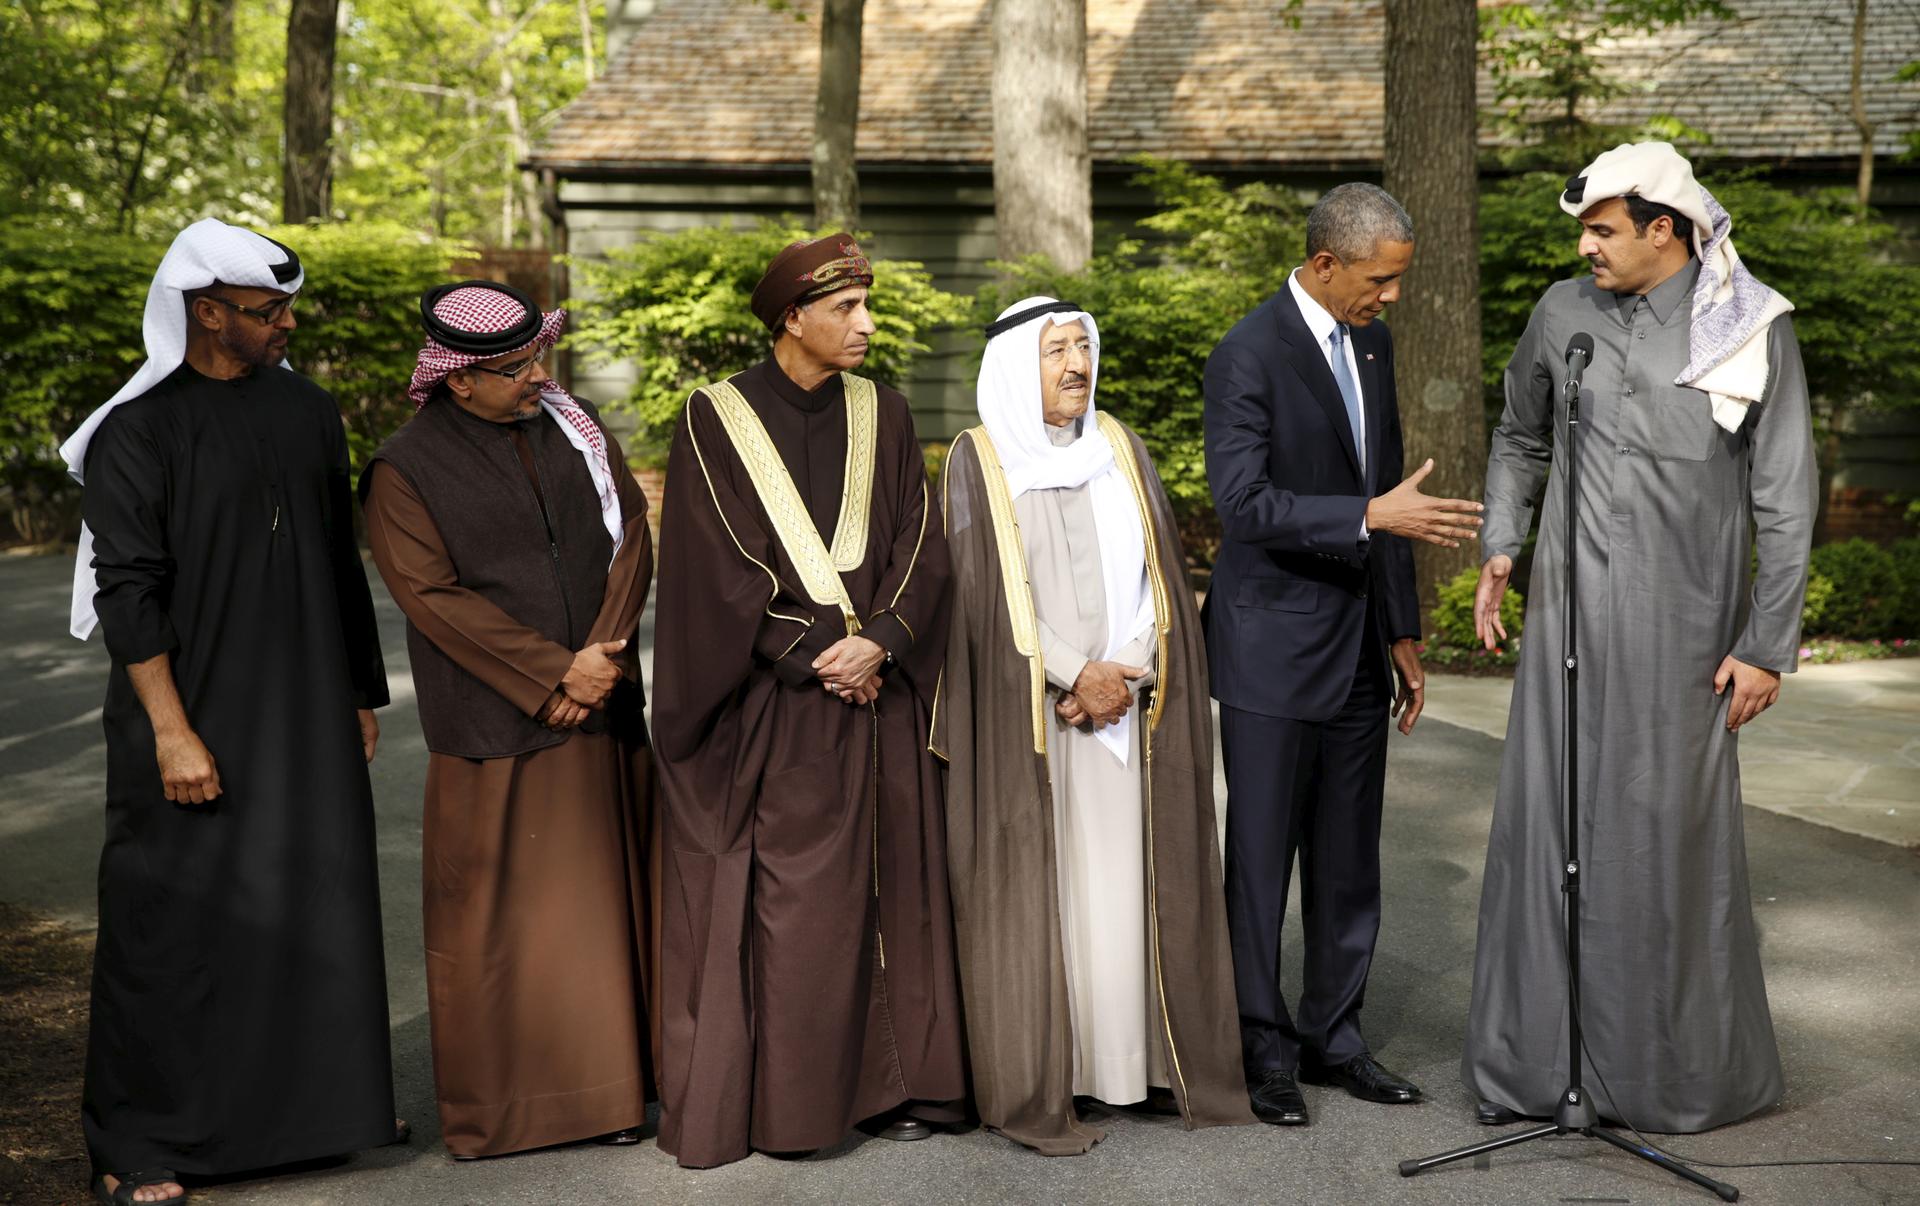 President Barack Obama shakes hands with the Emir of Qatar, Sheikh Tameem bin Hamad Al Thani, while hosting the six-nation Gulf Cooperation Council at Camp David on May 14, 2015.